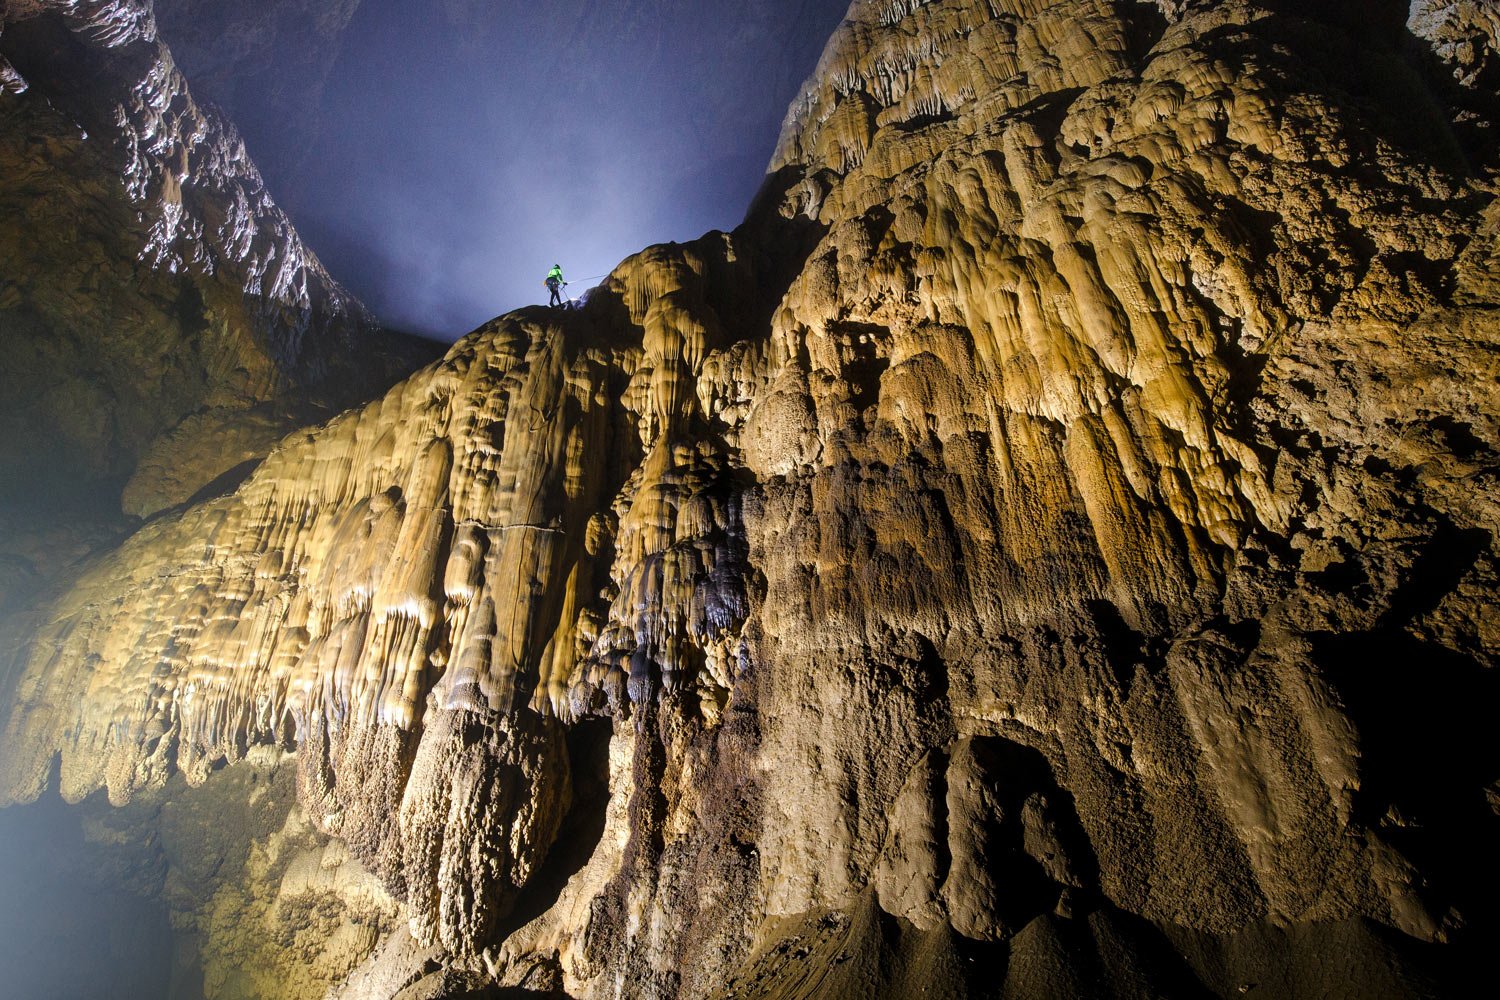 The great wall of Vietnam in Hang Son Doong Cave